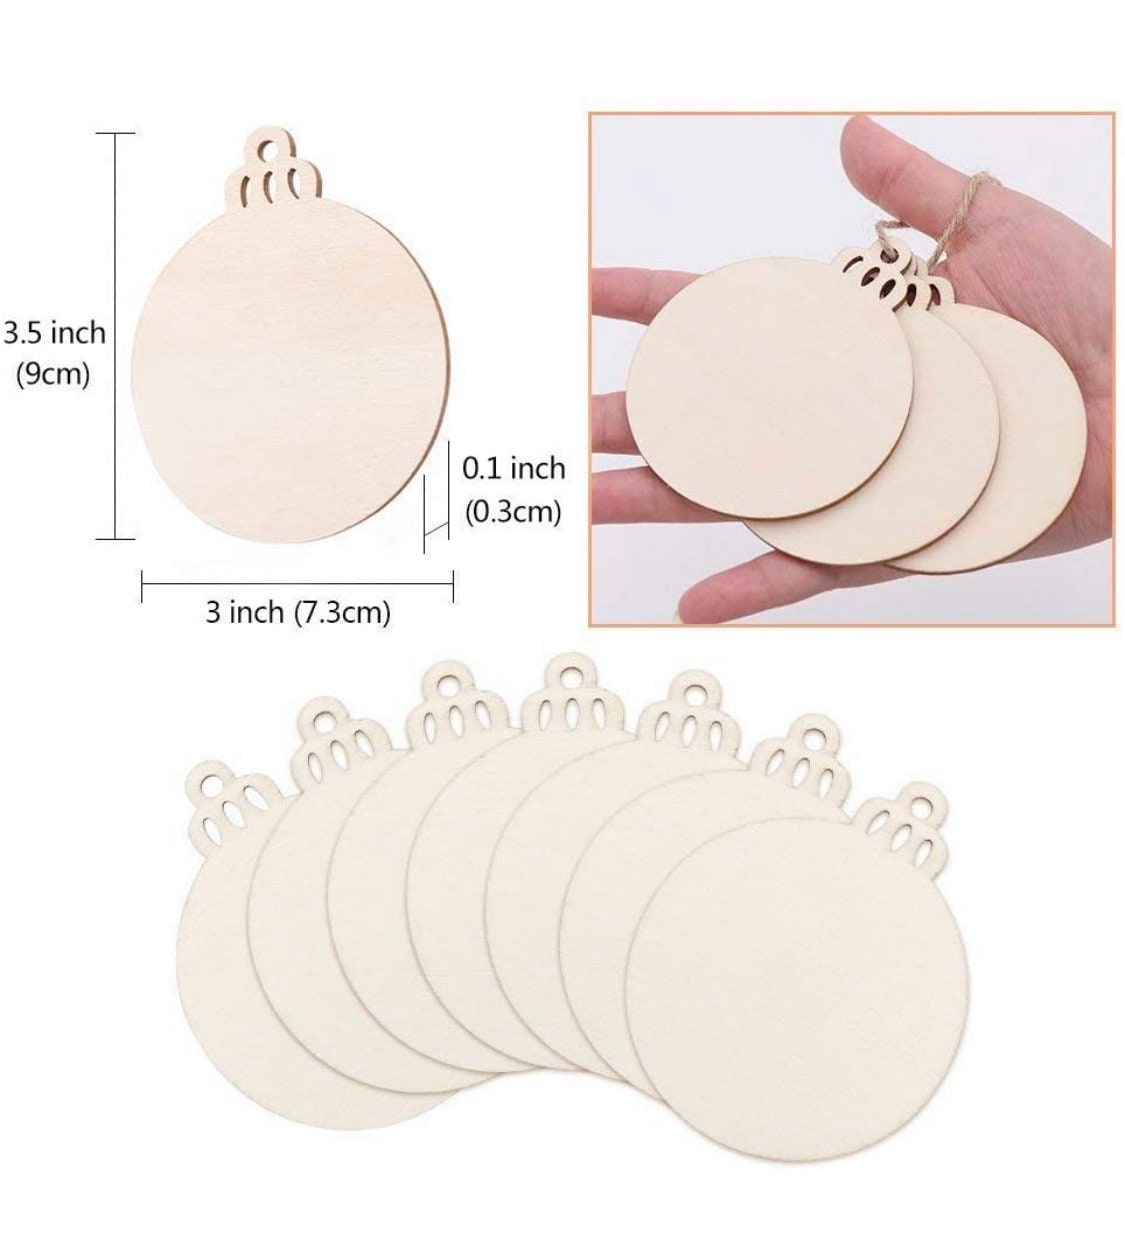 Wooden ornament blanks - predrilled holes - Great for Trees, Wreaths, Gifts, Decor, and Crafts 3.5”